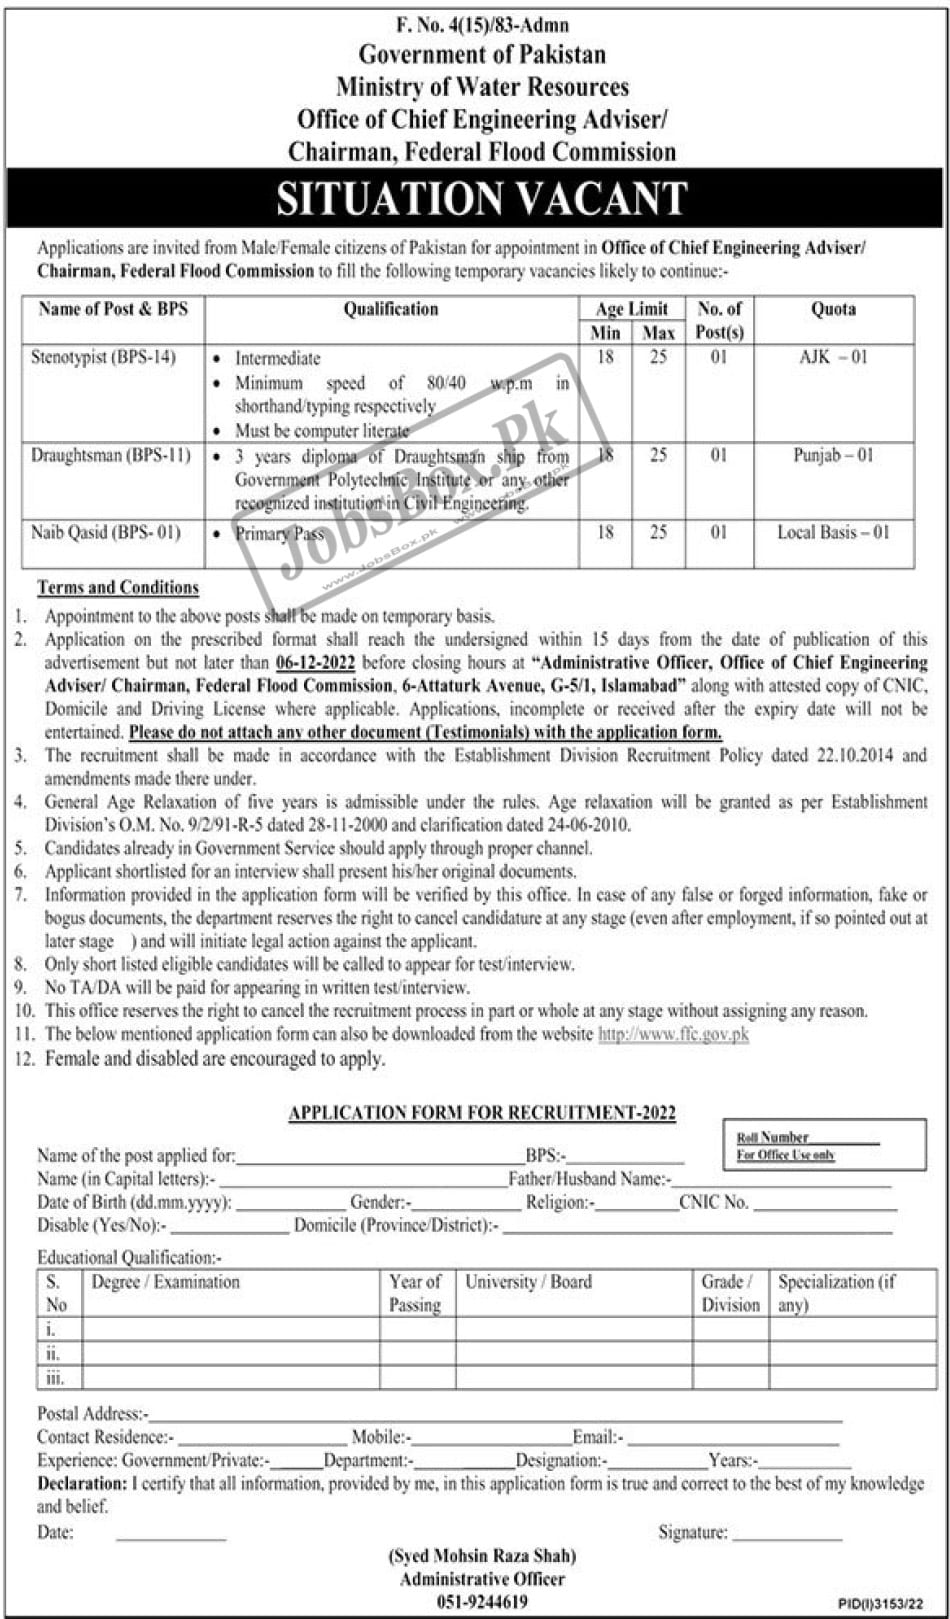 Ministry of Water Resources Jobs 2022
